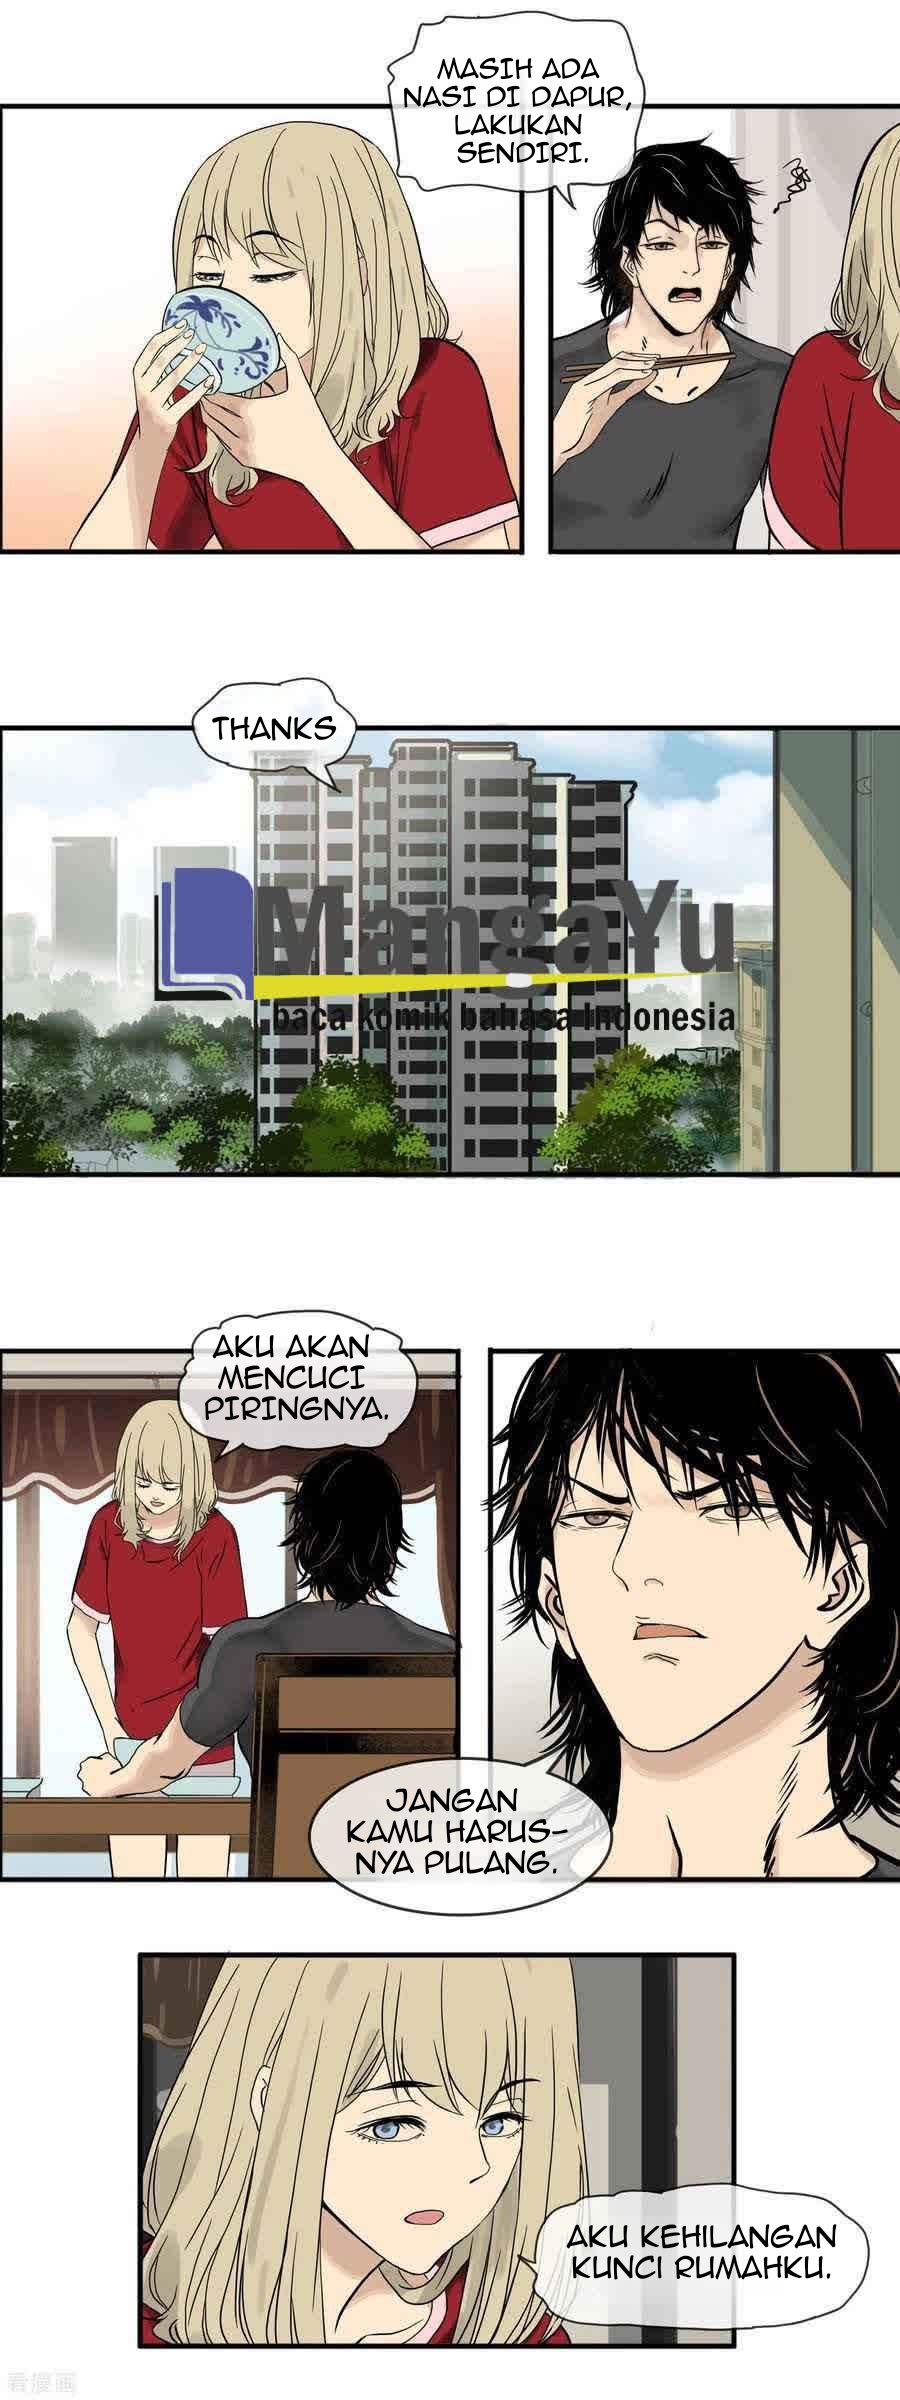 Zoombie City Chapter 02 Bahasa Indonesia